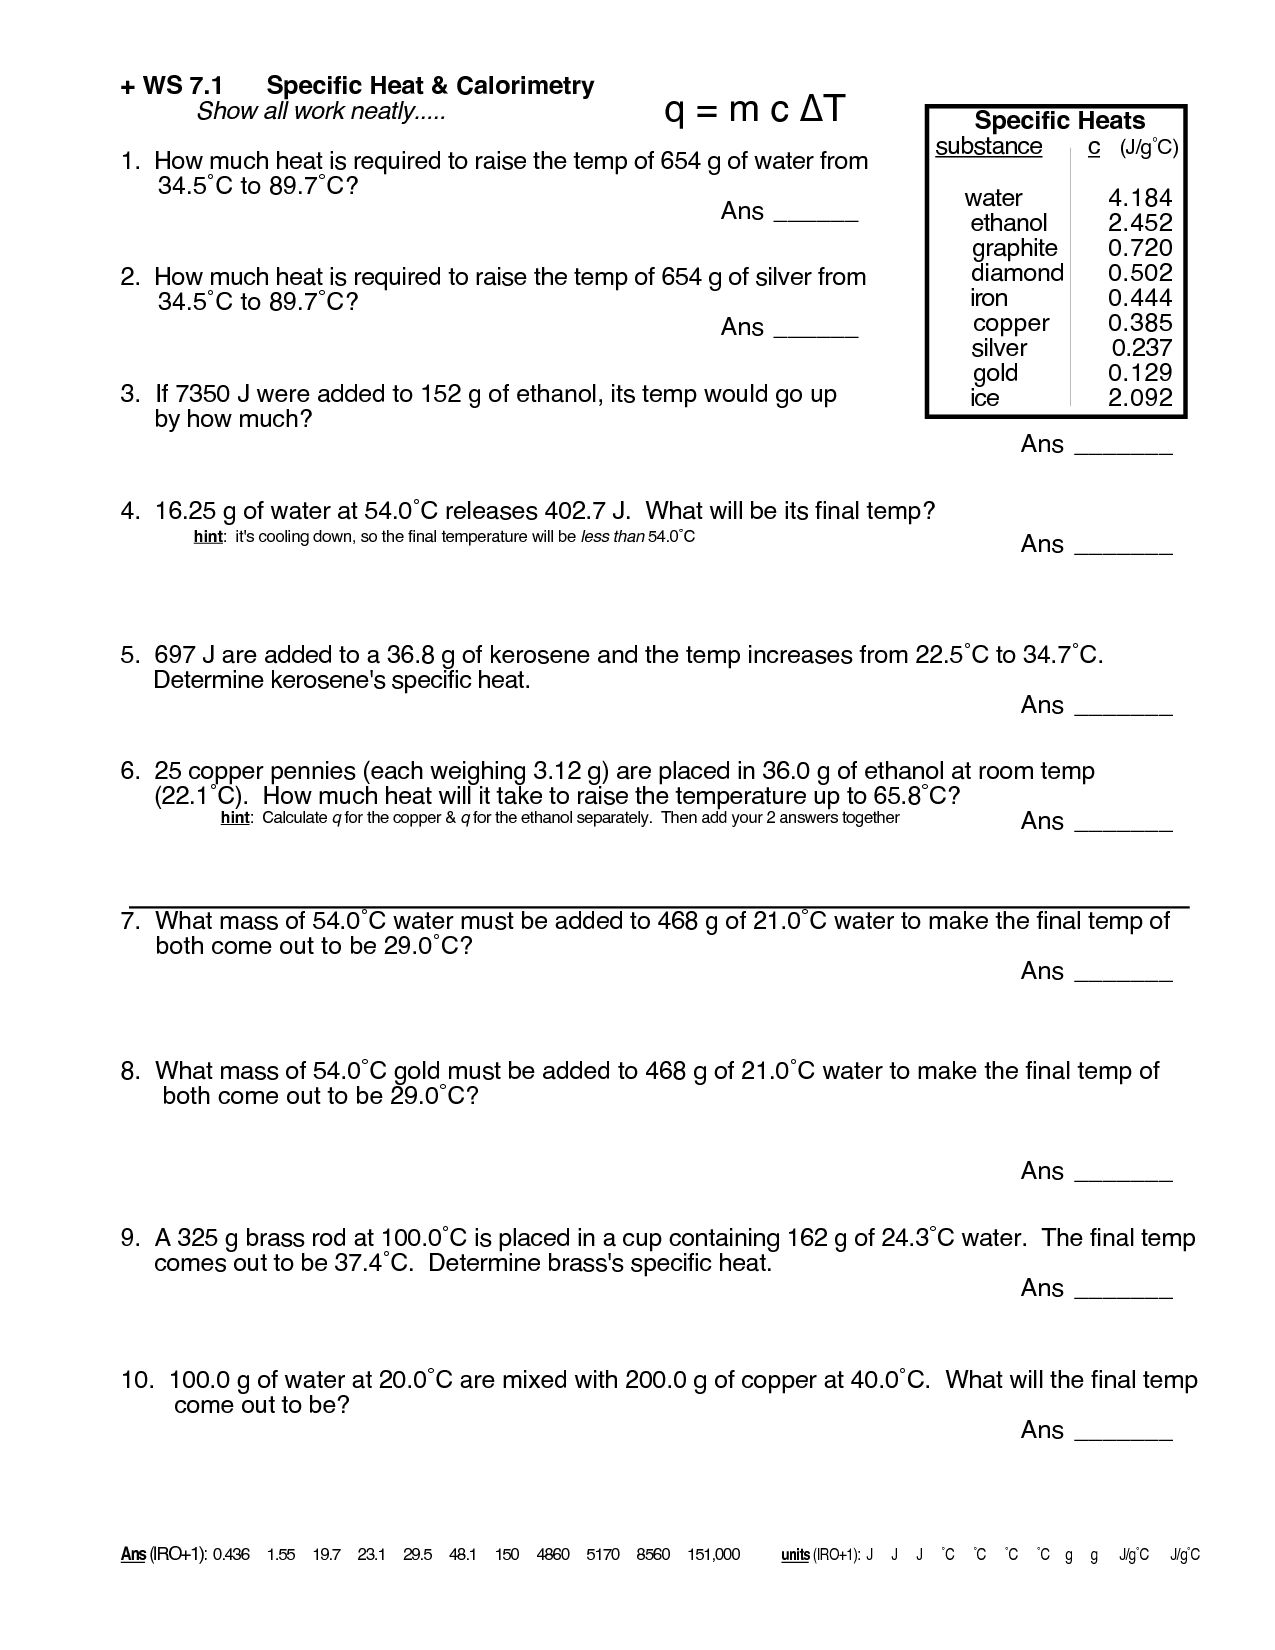 Specific Heat Calculations Worksheet db excel com